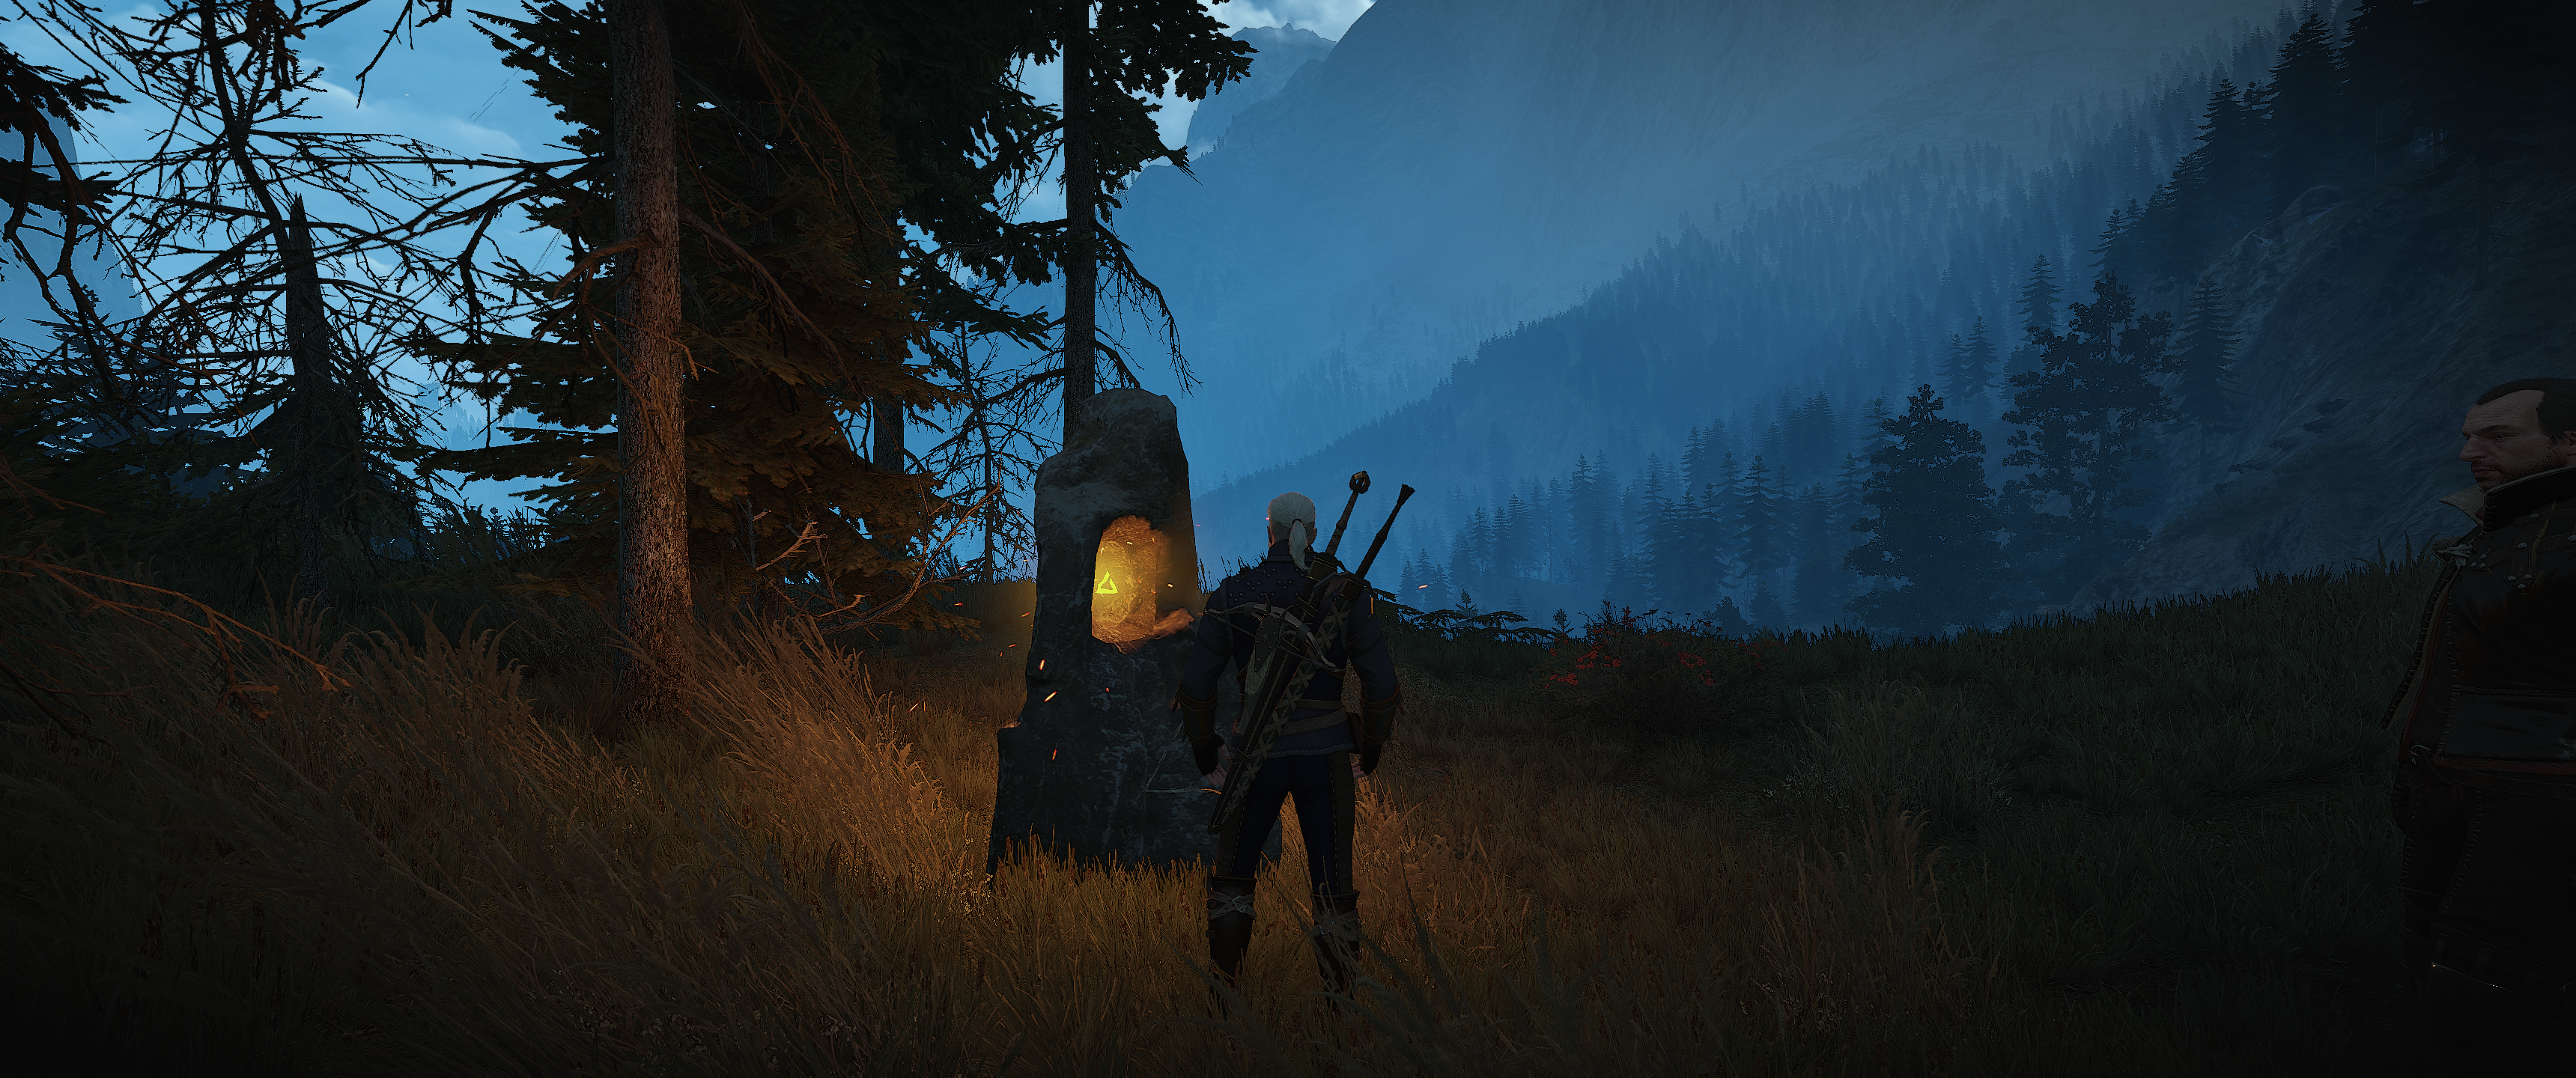 The Witcher The Witcher 3 Wild Hunt Places Of Power Geralt Of Rivia Landscape PC Gaming 3440x1440